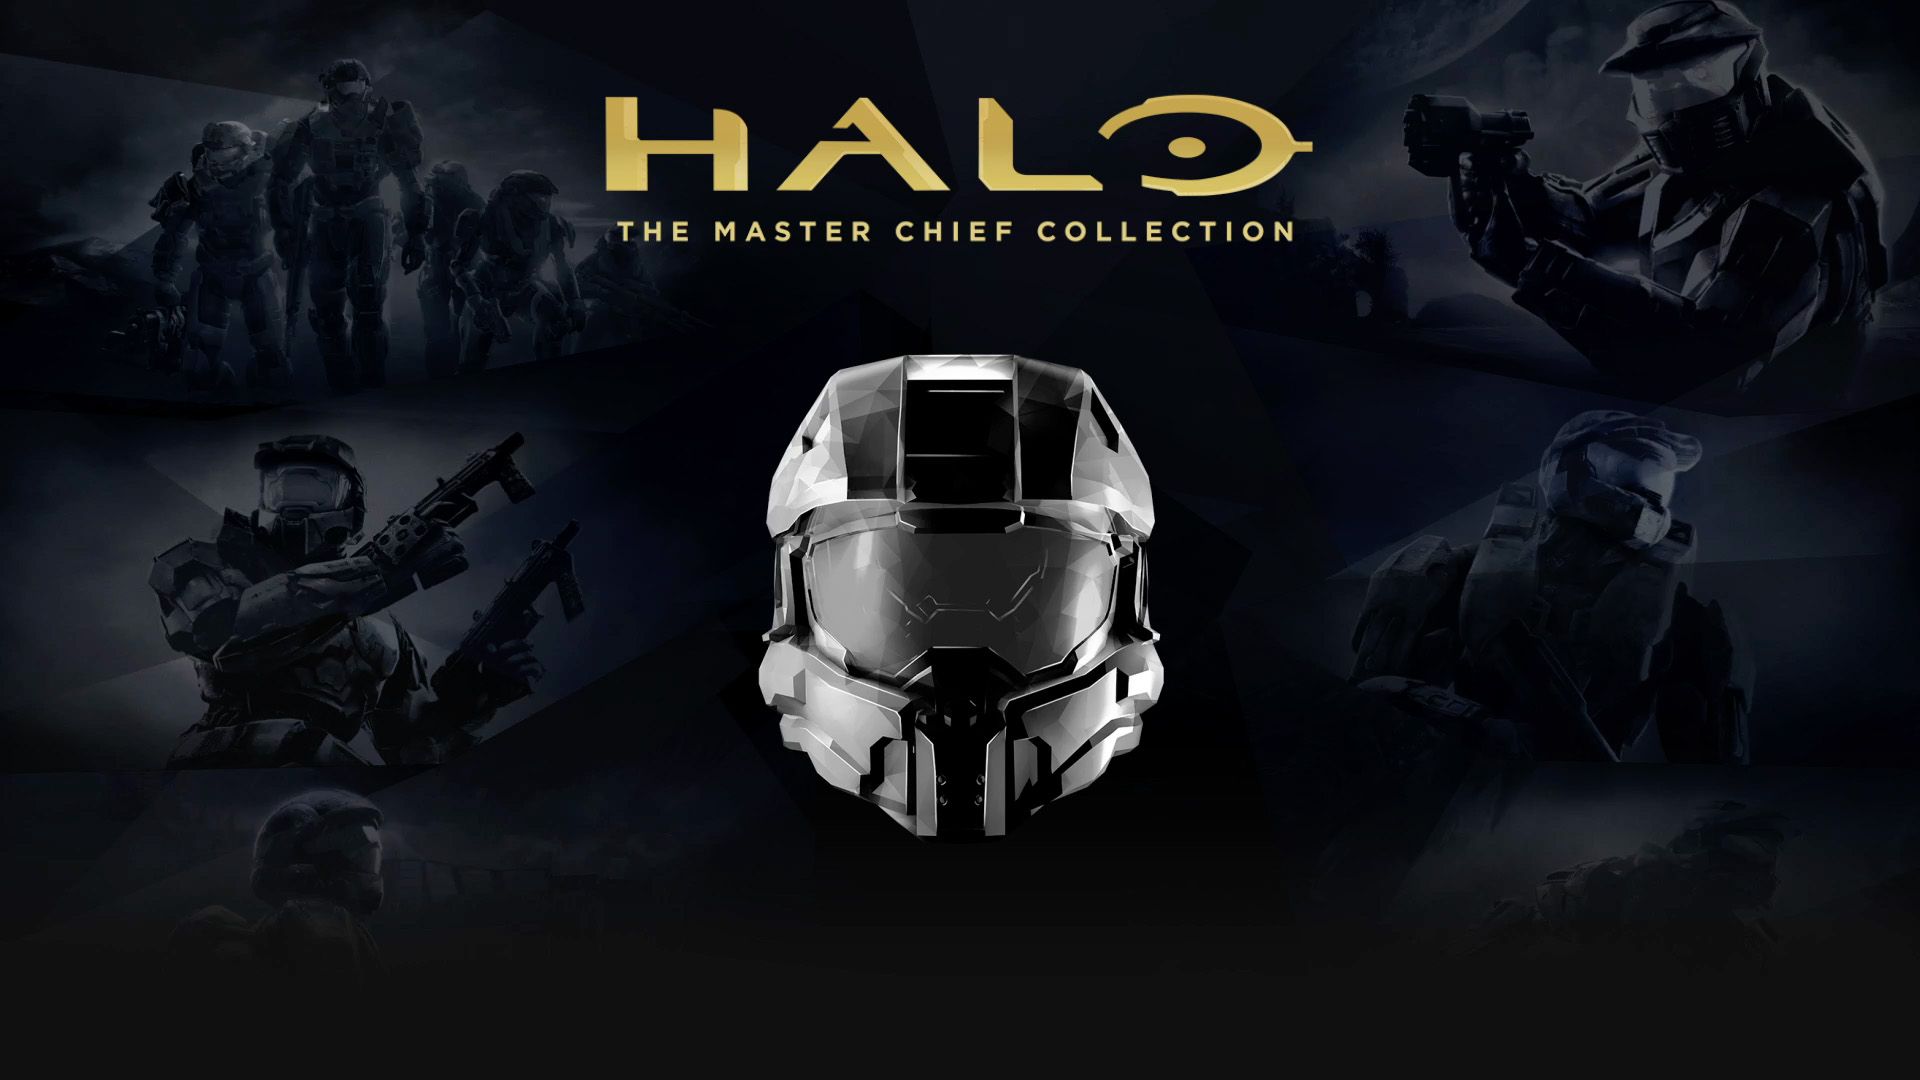 Halo: The Master Chief Collection has a “blockbuster launch on PC”